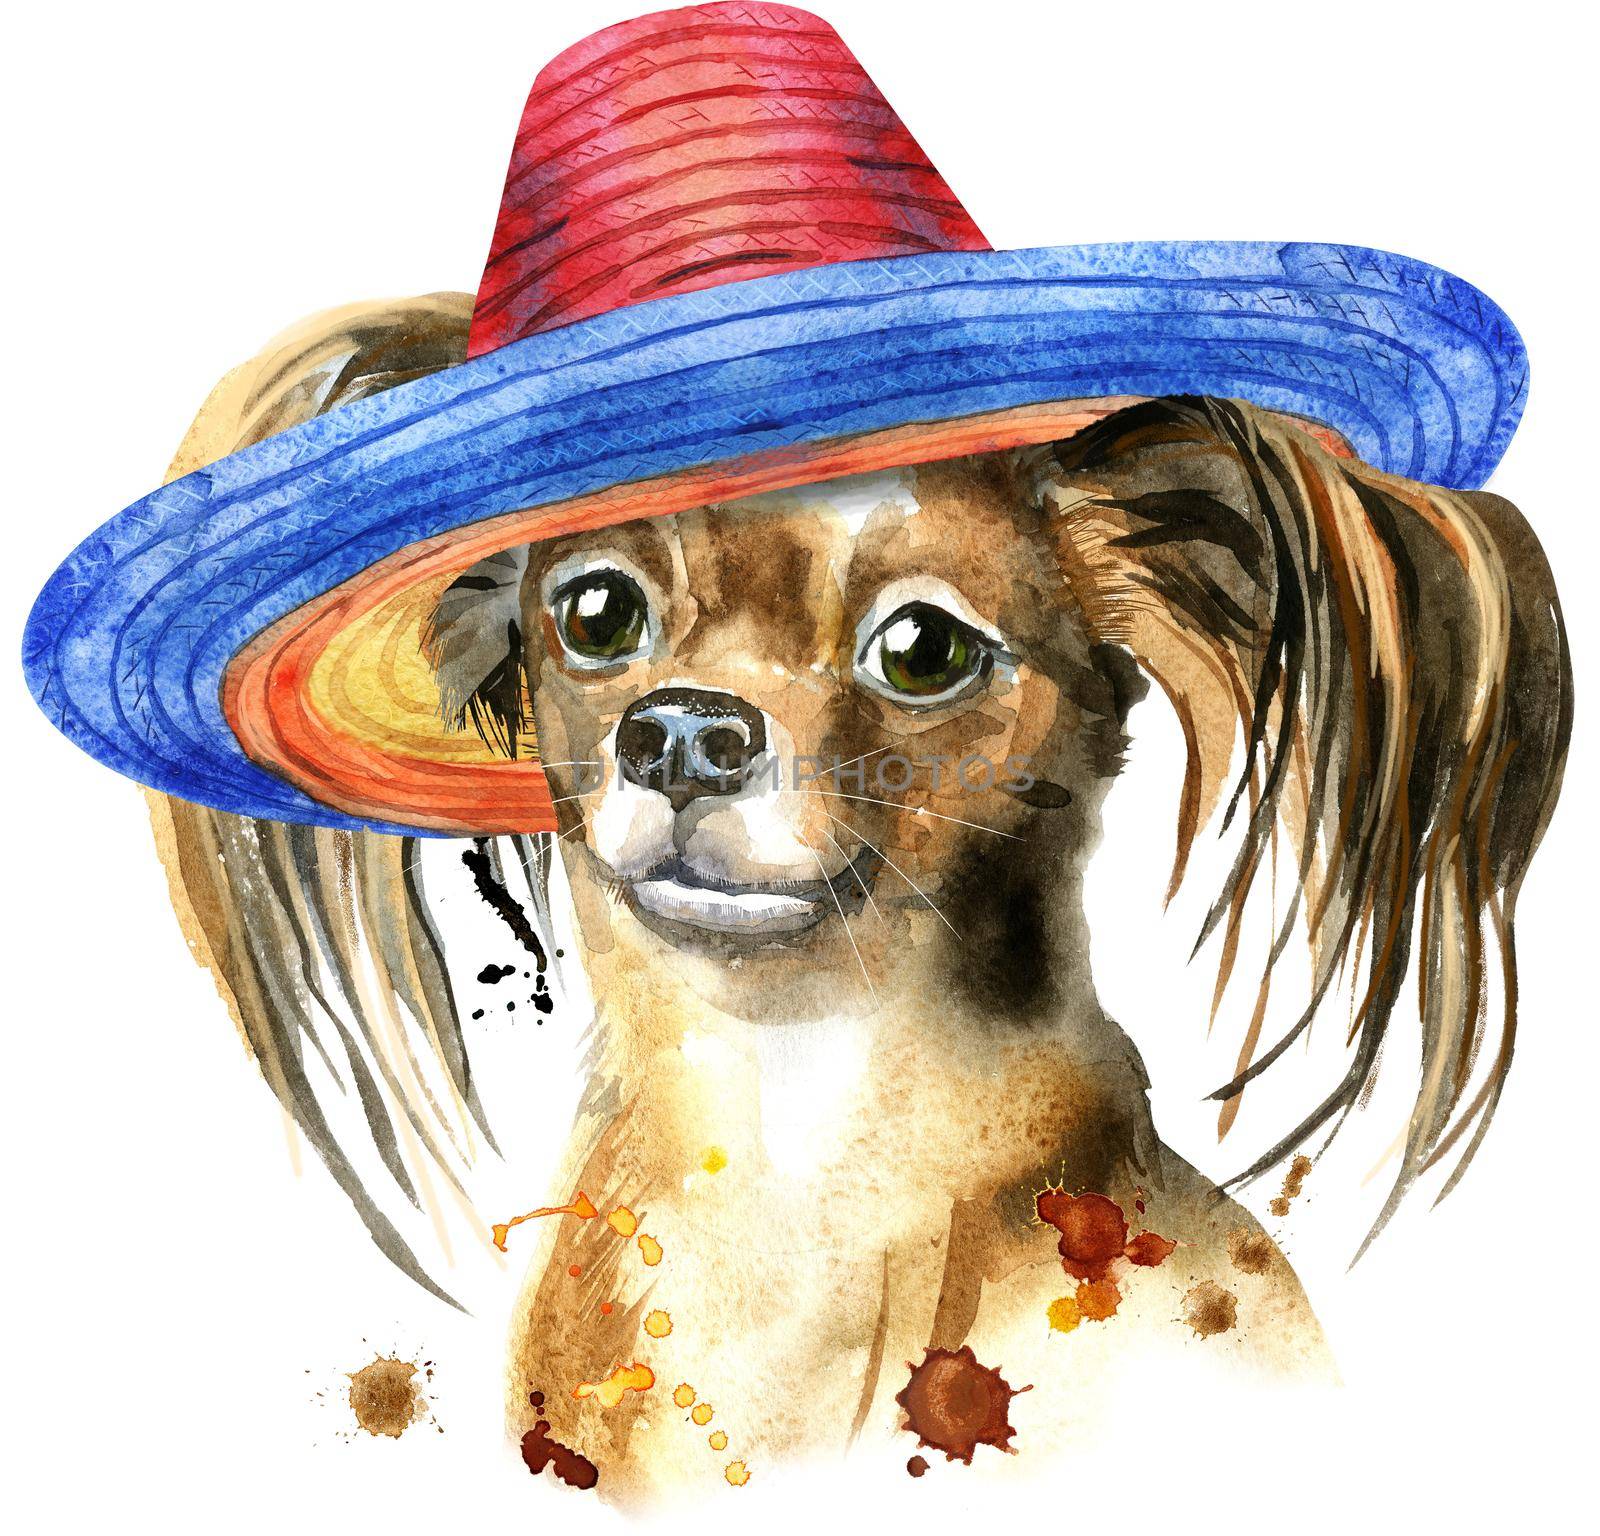 Watercolor portrait of long-haired toy terrier with sombrero by NataOmsk